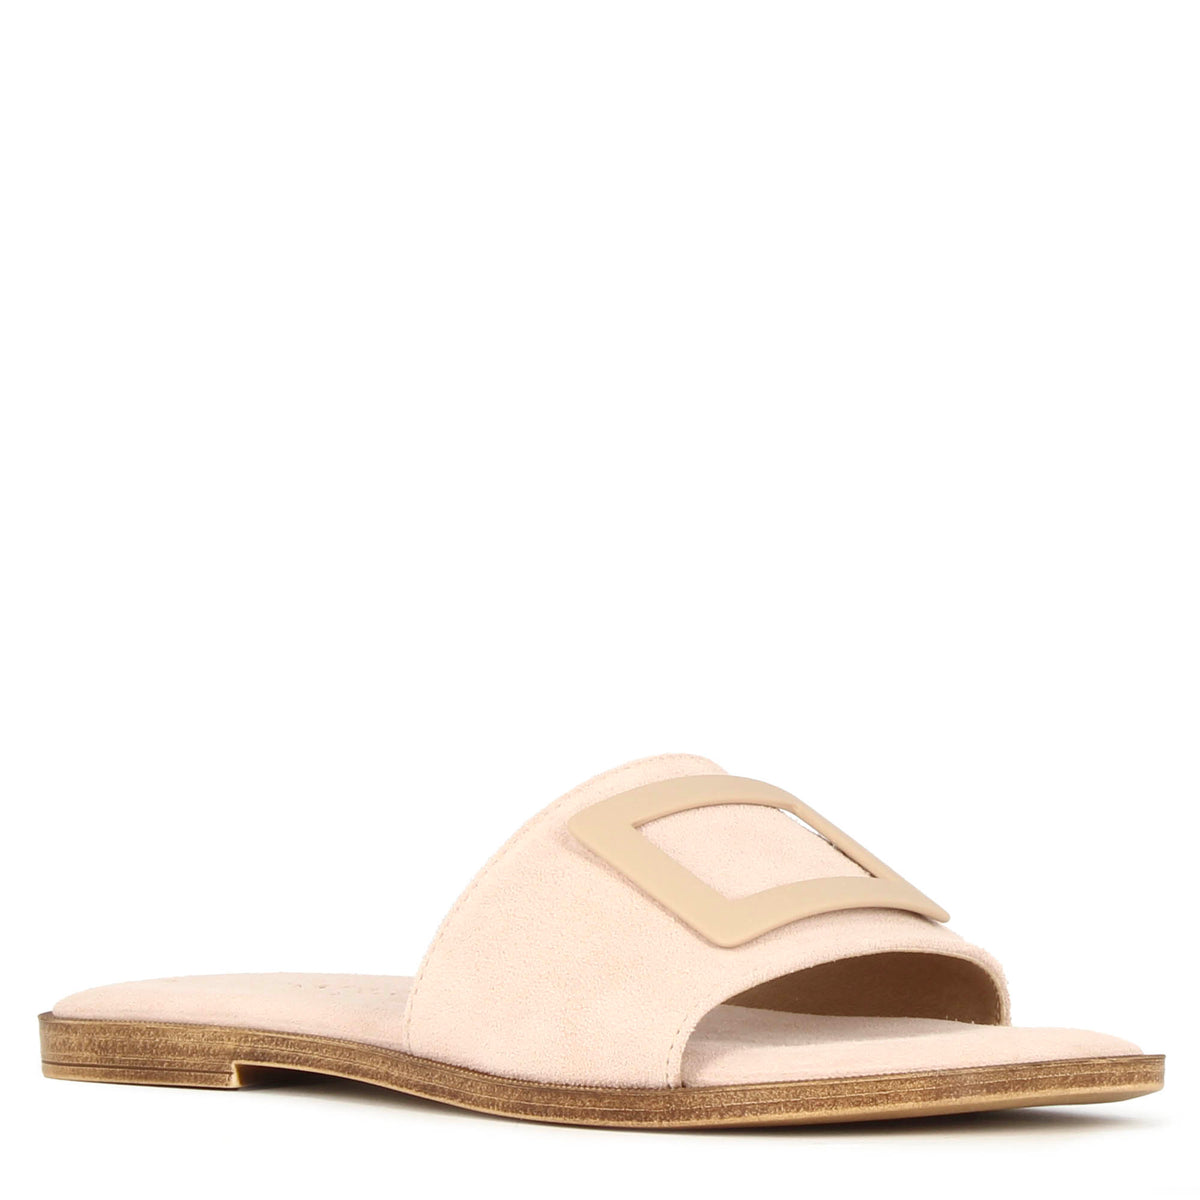 Women's suede slippers with beige strap